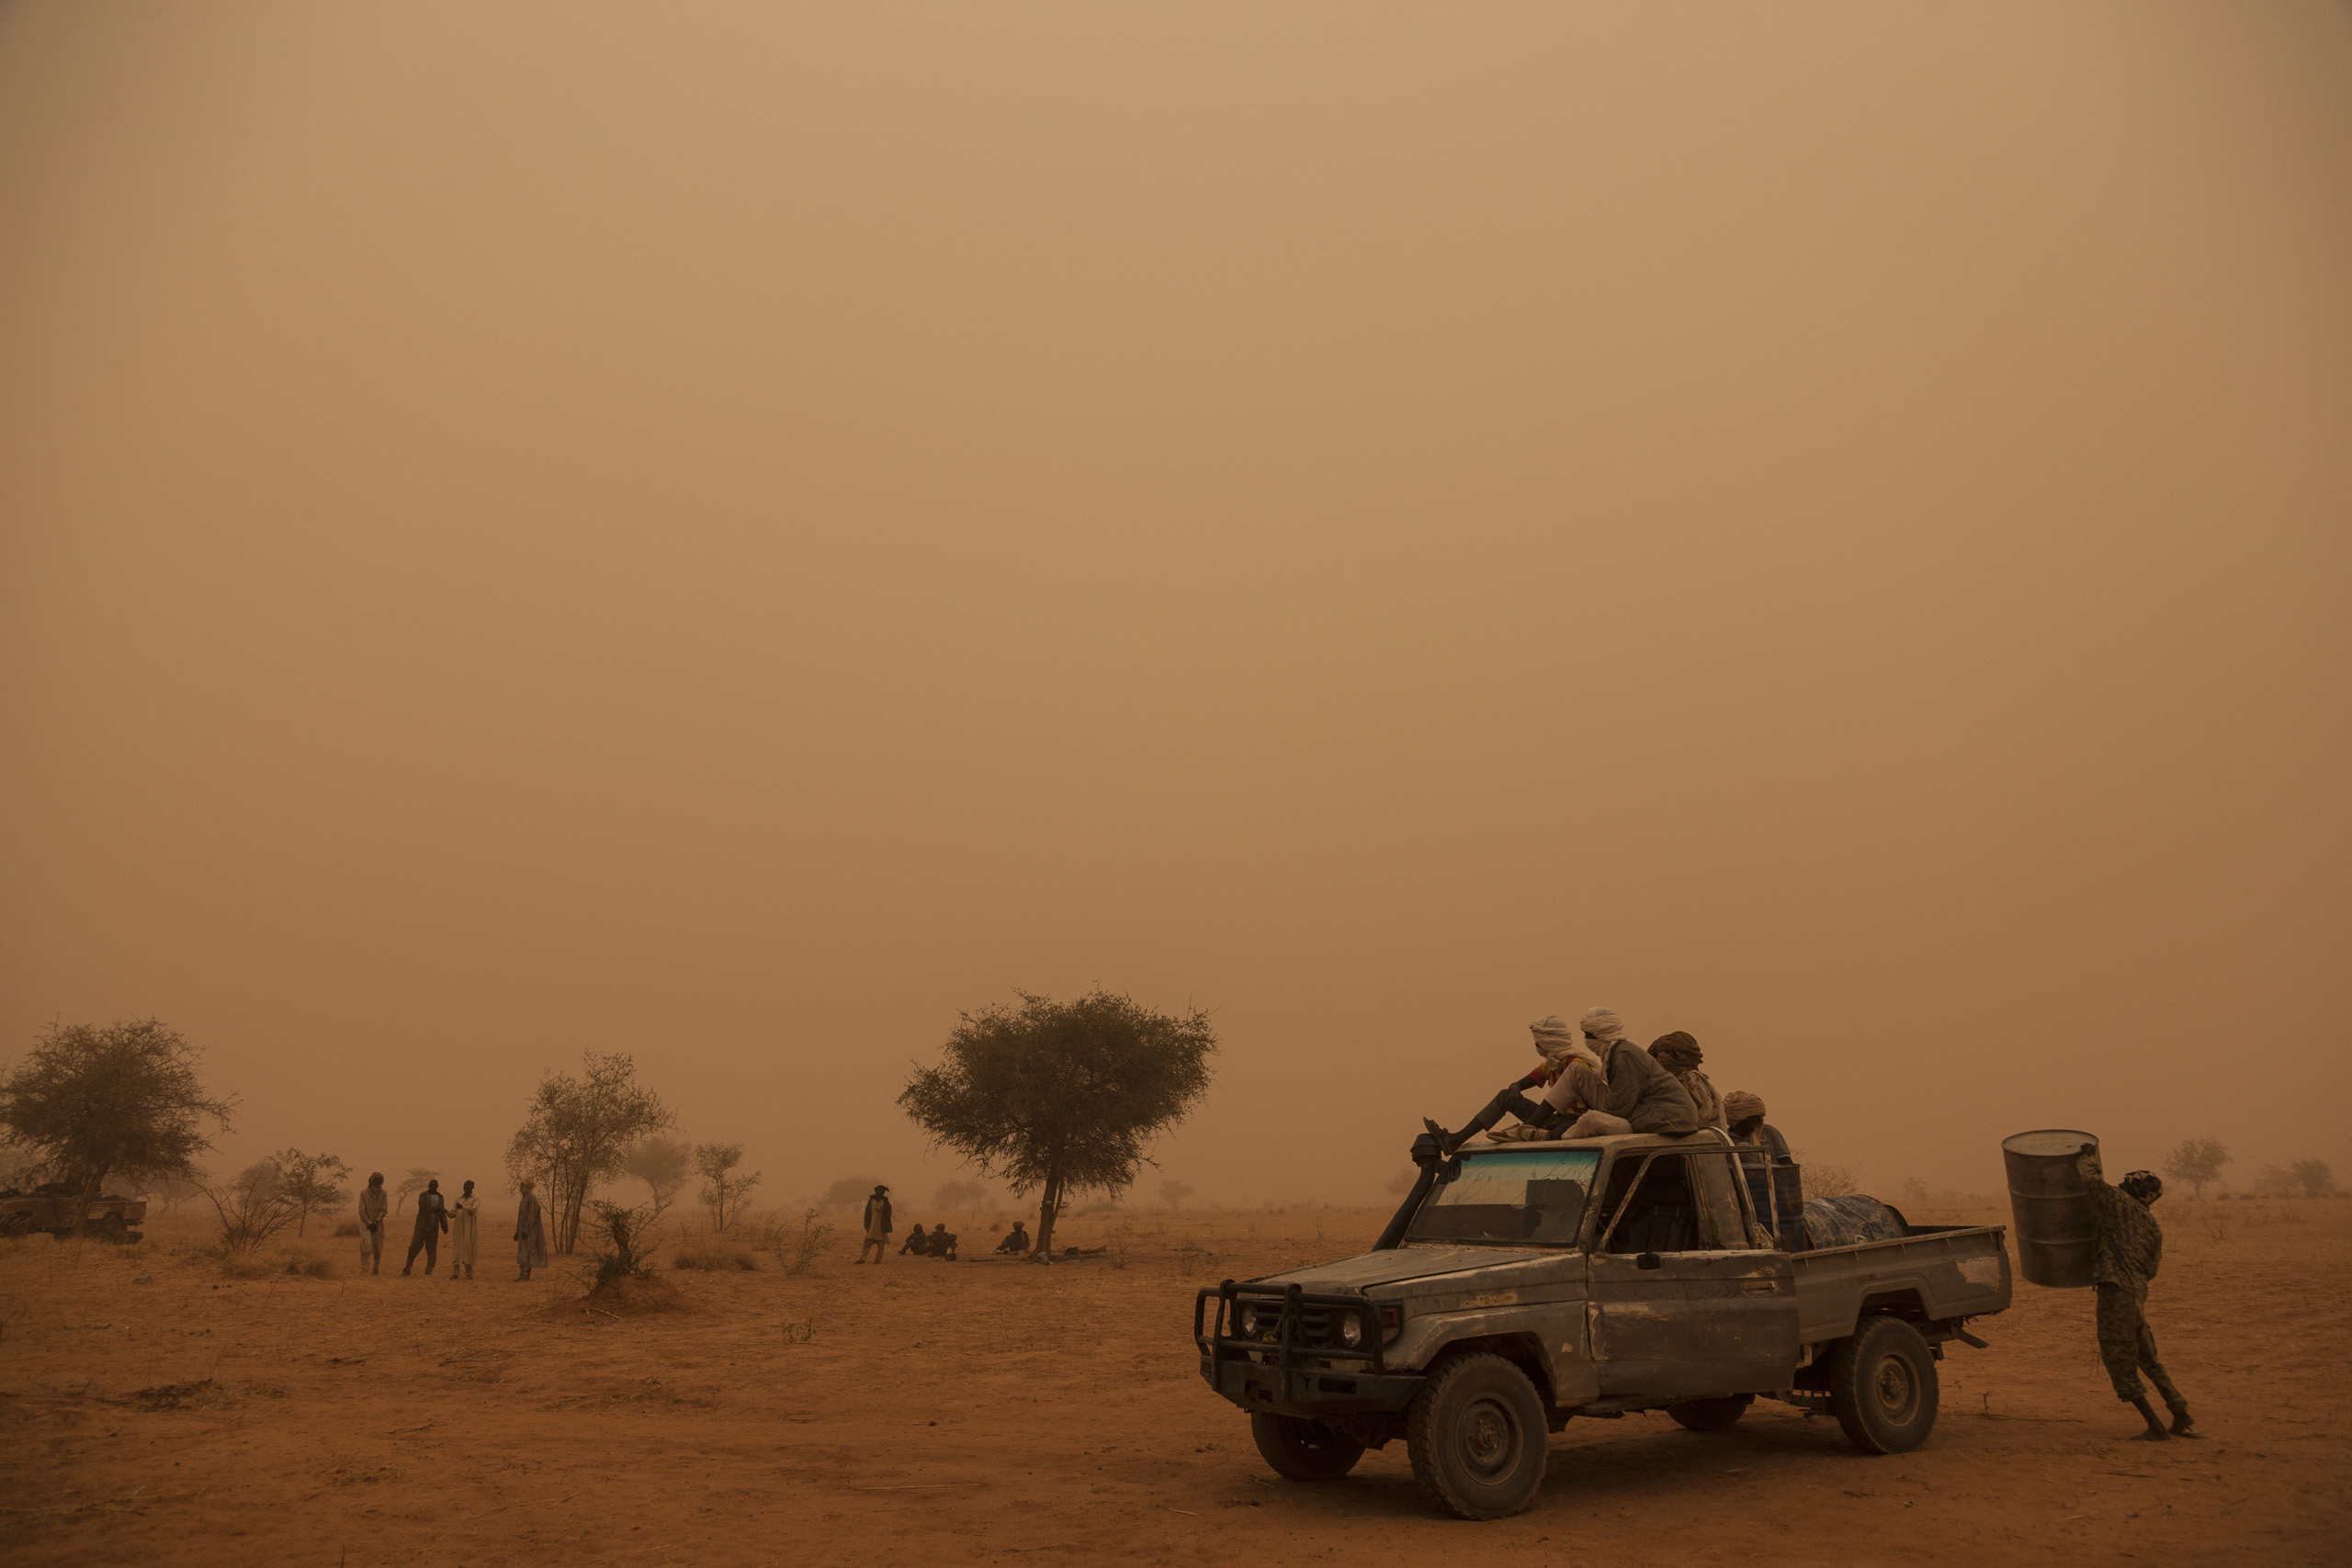 Rebel soldiers from the Sudan Liberation Army – Abdul Wahid (SLA-AW) prepare the truck to go for water in the middle of a sand storm in North Darfur, Sudan, on Feb. 24, 2015. (Adriane Ohanesian)